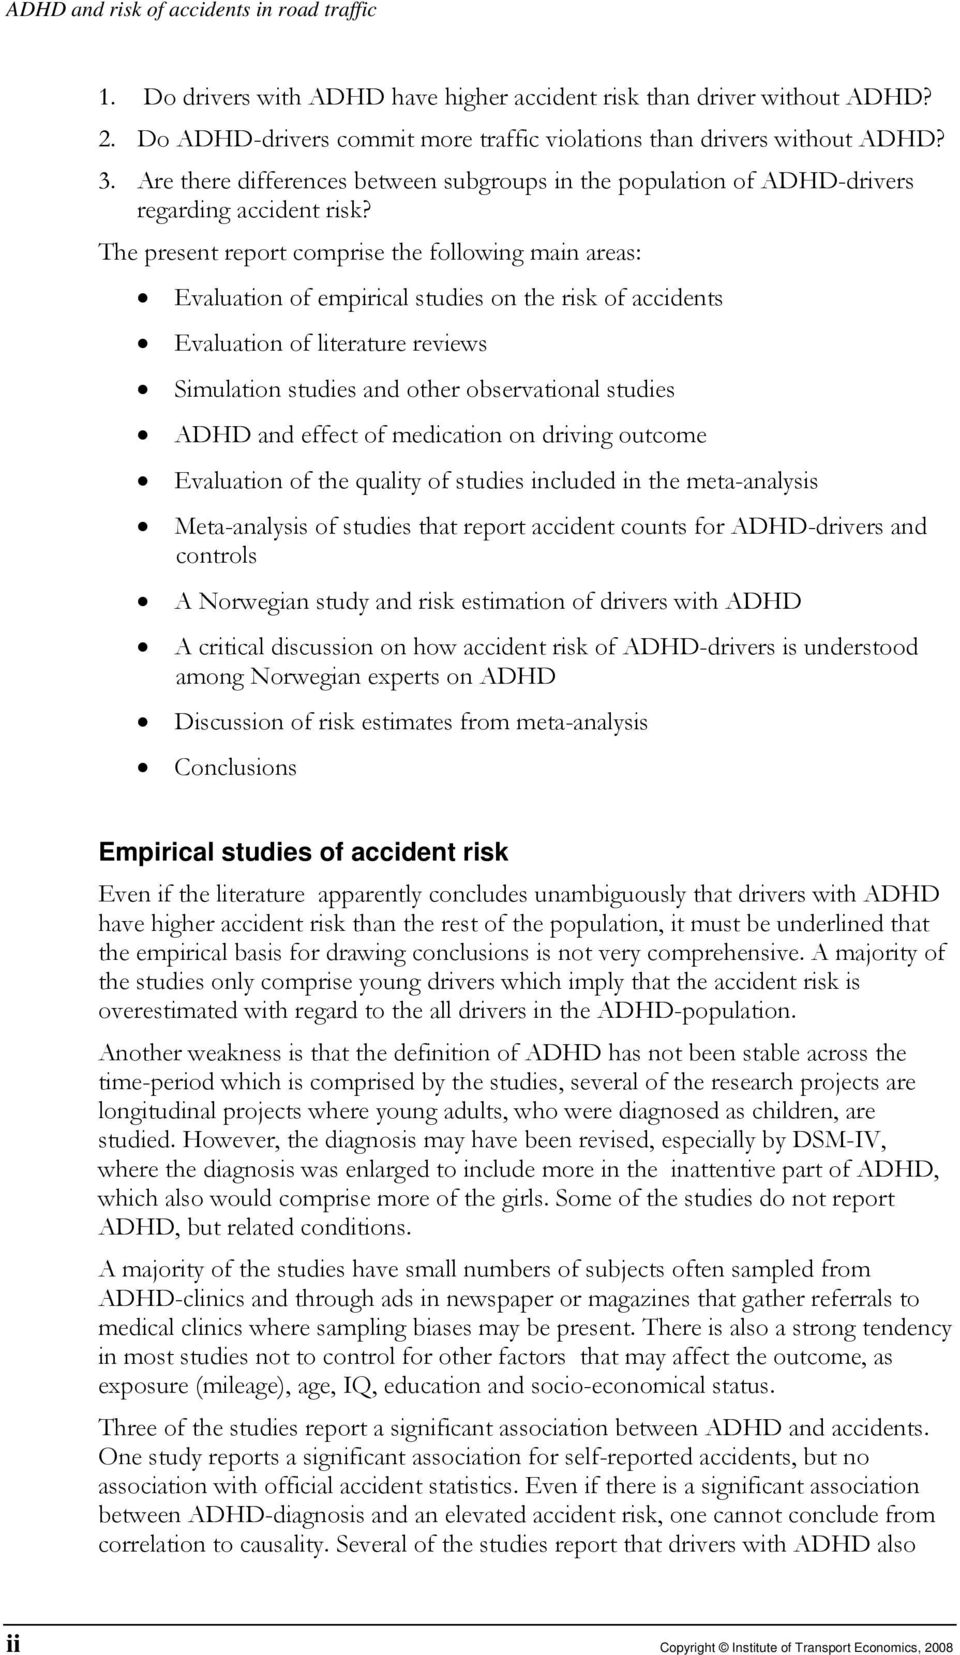 The present report comprise the following main areas: Evaluation of empirical studies on the risk of accidents Evaluation of literature reviews Simulation studies and other observational studies ADHD